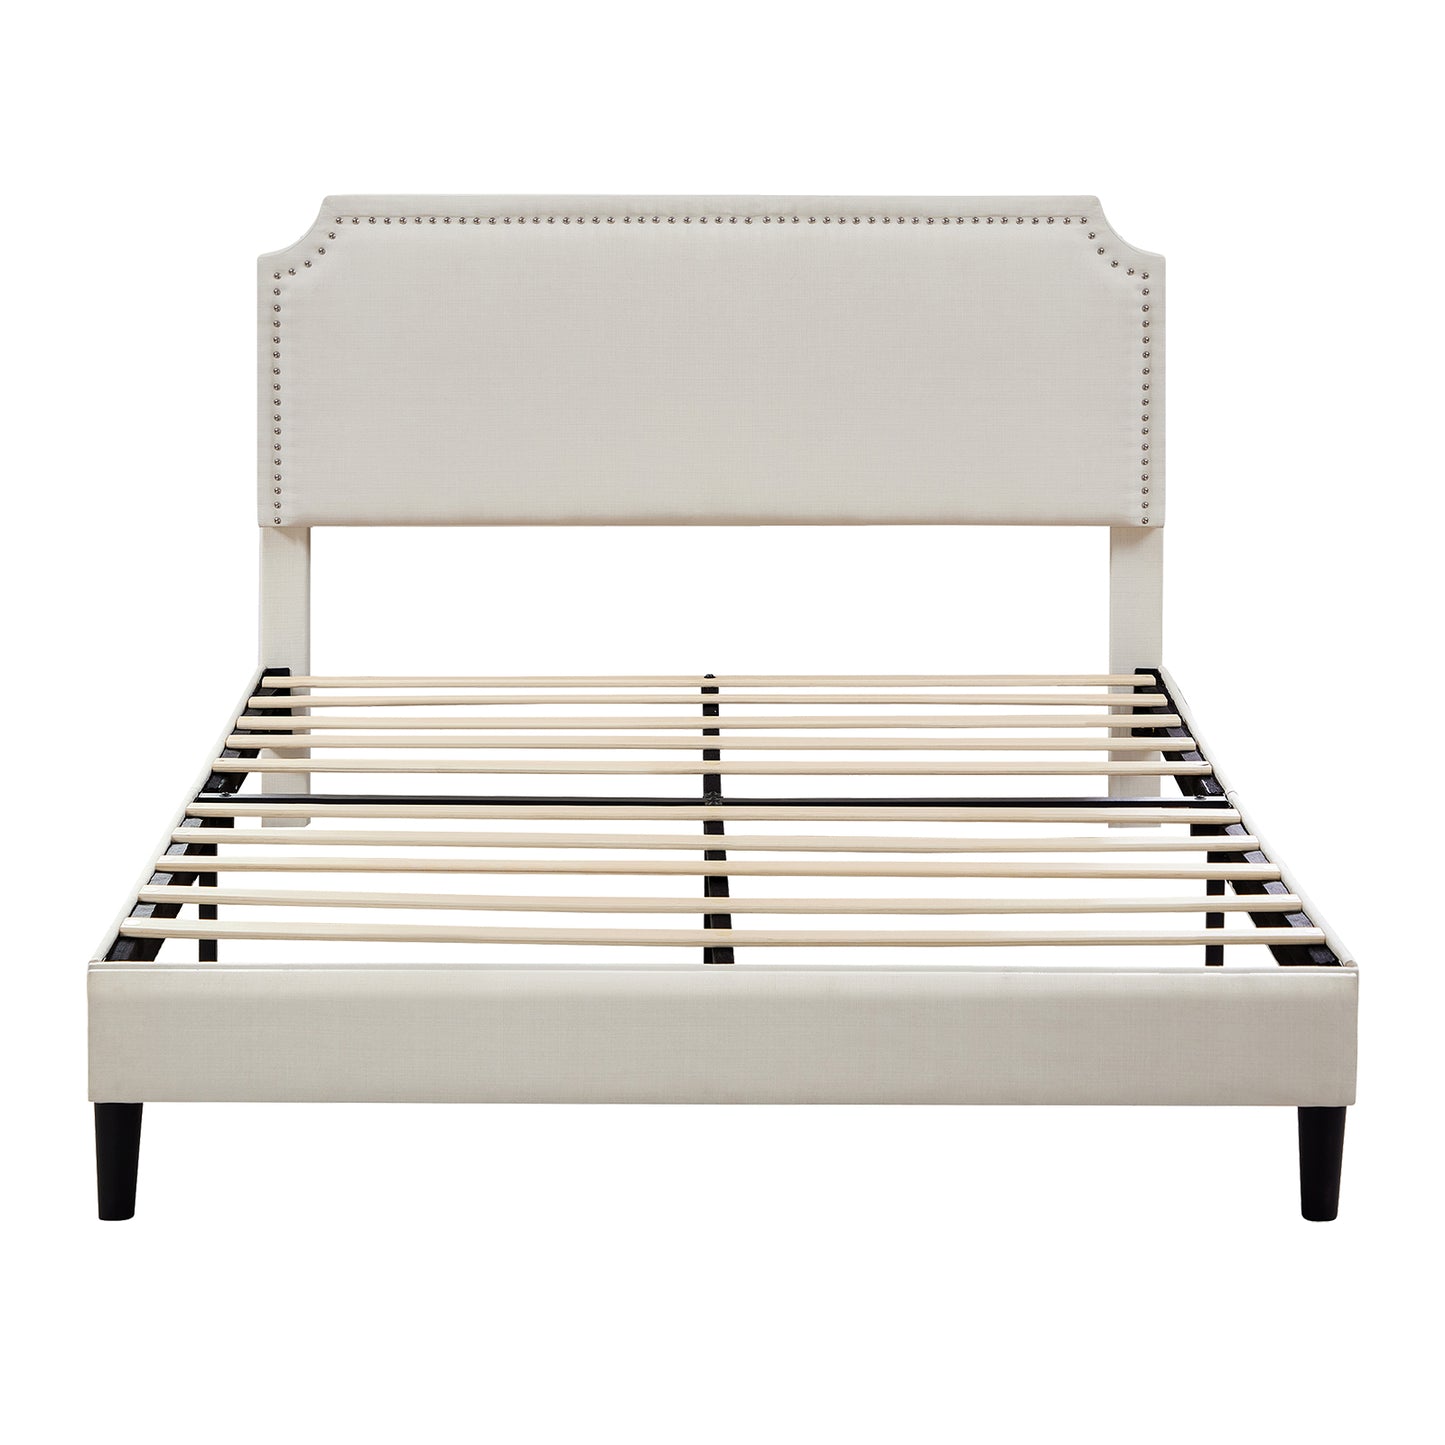 Full Size Frame Platform Bed with Upholstered Headboard and Slat Support, Heavy Duty Mattress Foundation, No Box Spring Required, Easy to Assemble,Beige